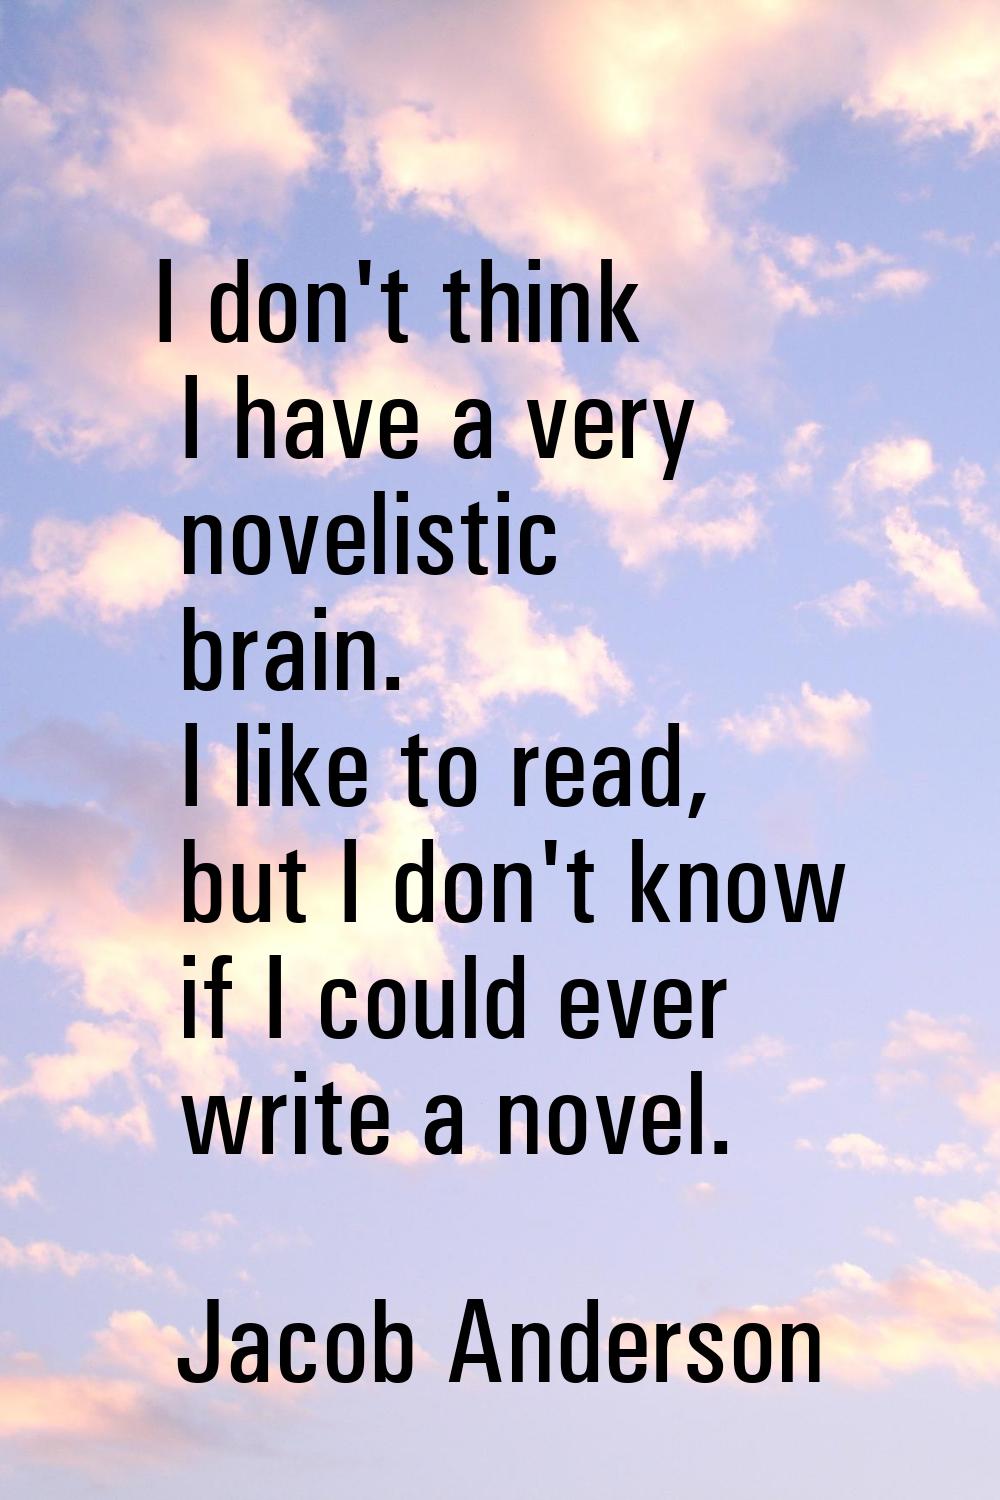 I don't think I have a very novelistic brain. I like to read, but I don't know if I could ever writ